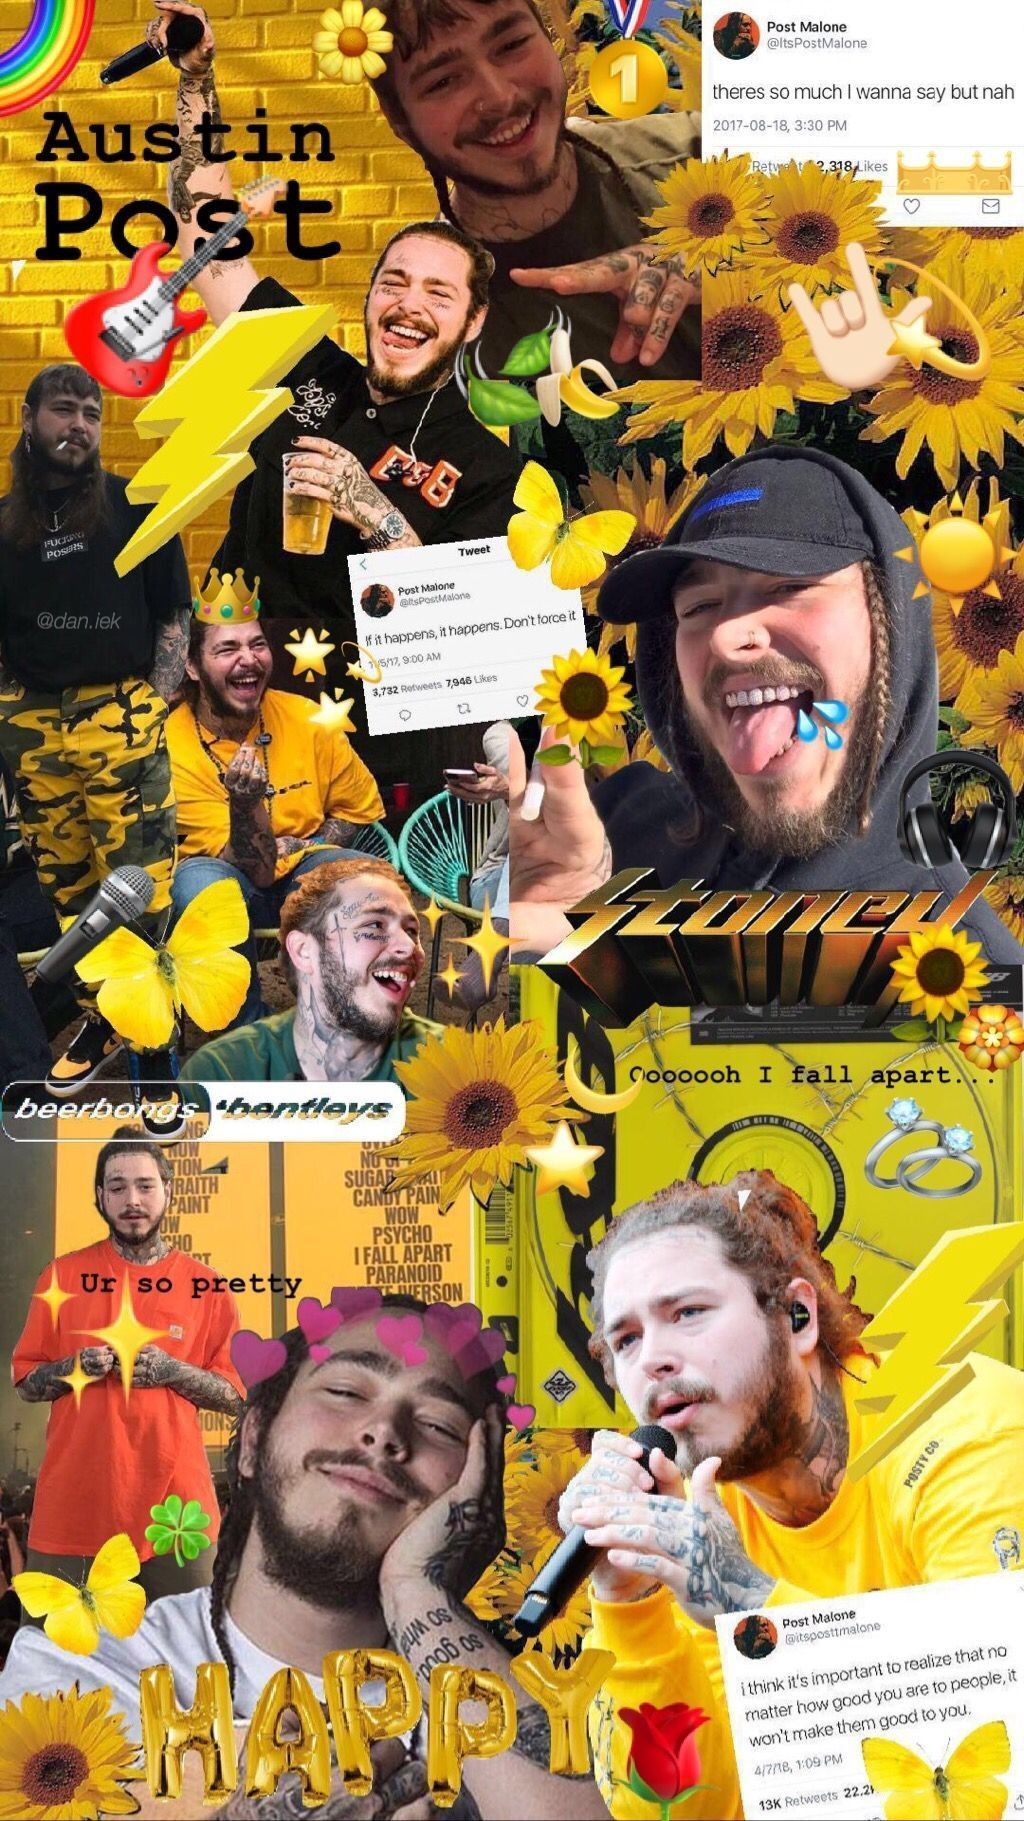 Post Malone Aesthetic Wallpaper Free Post Malone Aesthetic Background